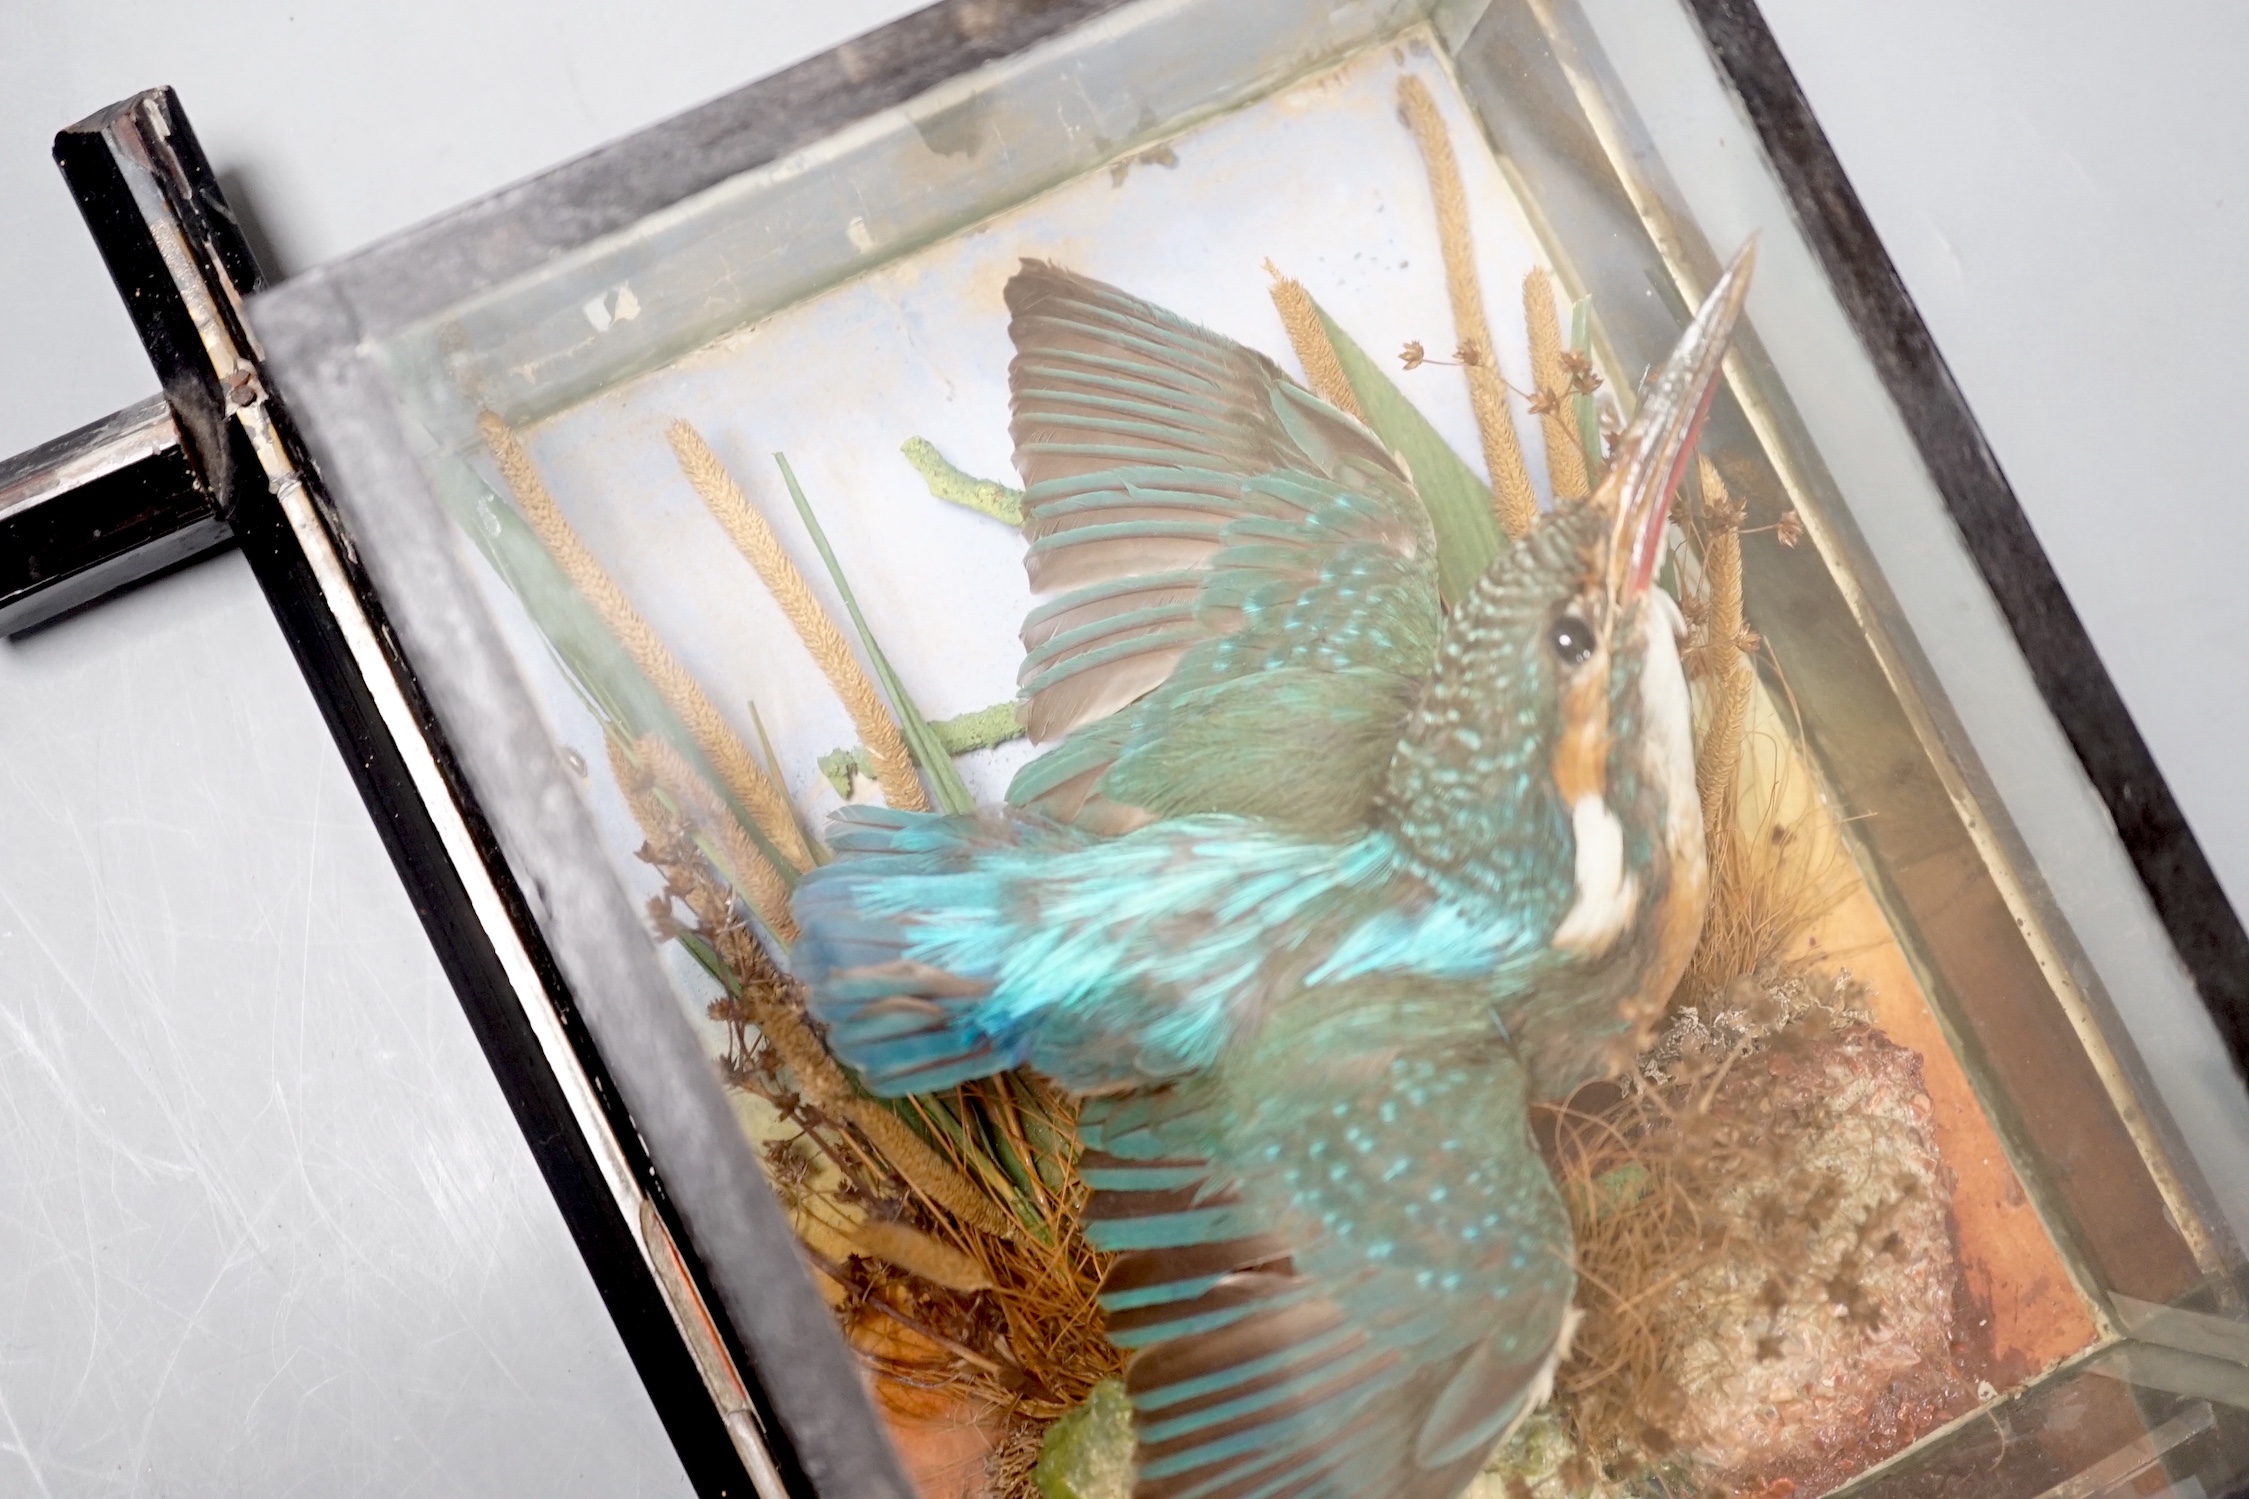 A Victorian taxidermy kingfisher in flight in wooden glazed case, attributed to W.B. Griggs of Manor Park, London - 21 x 16.5cm